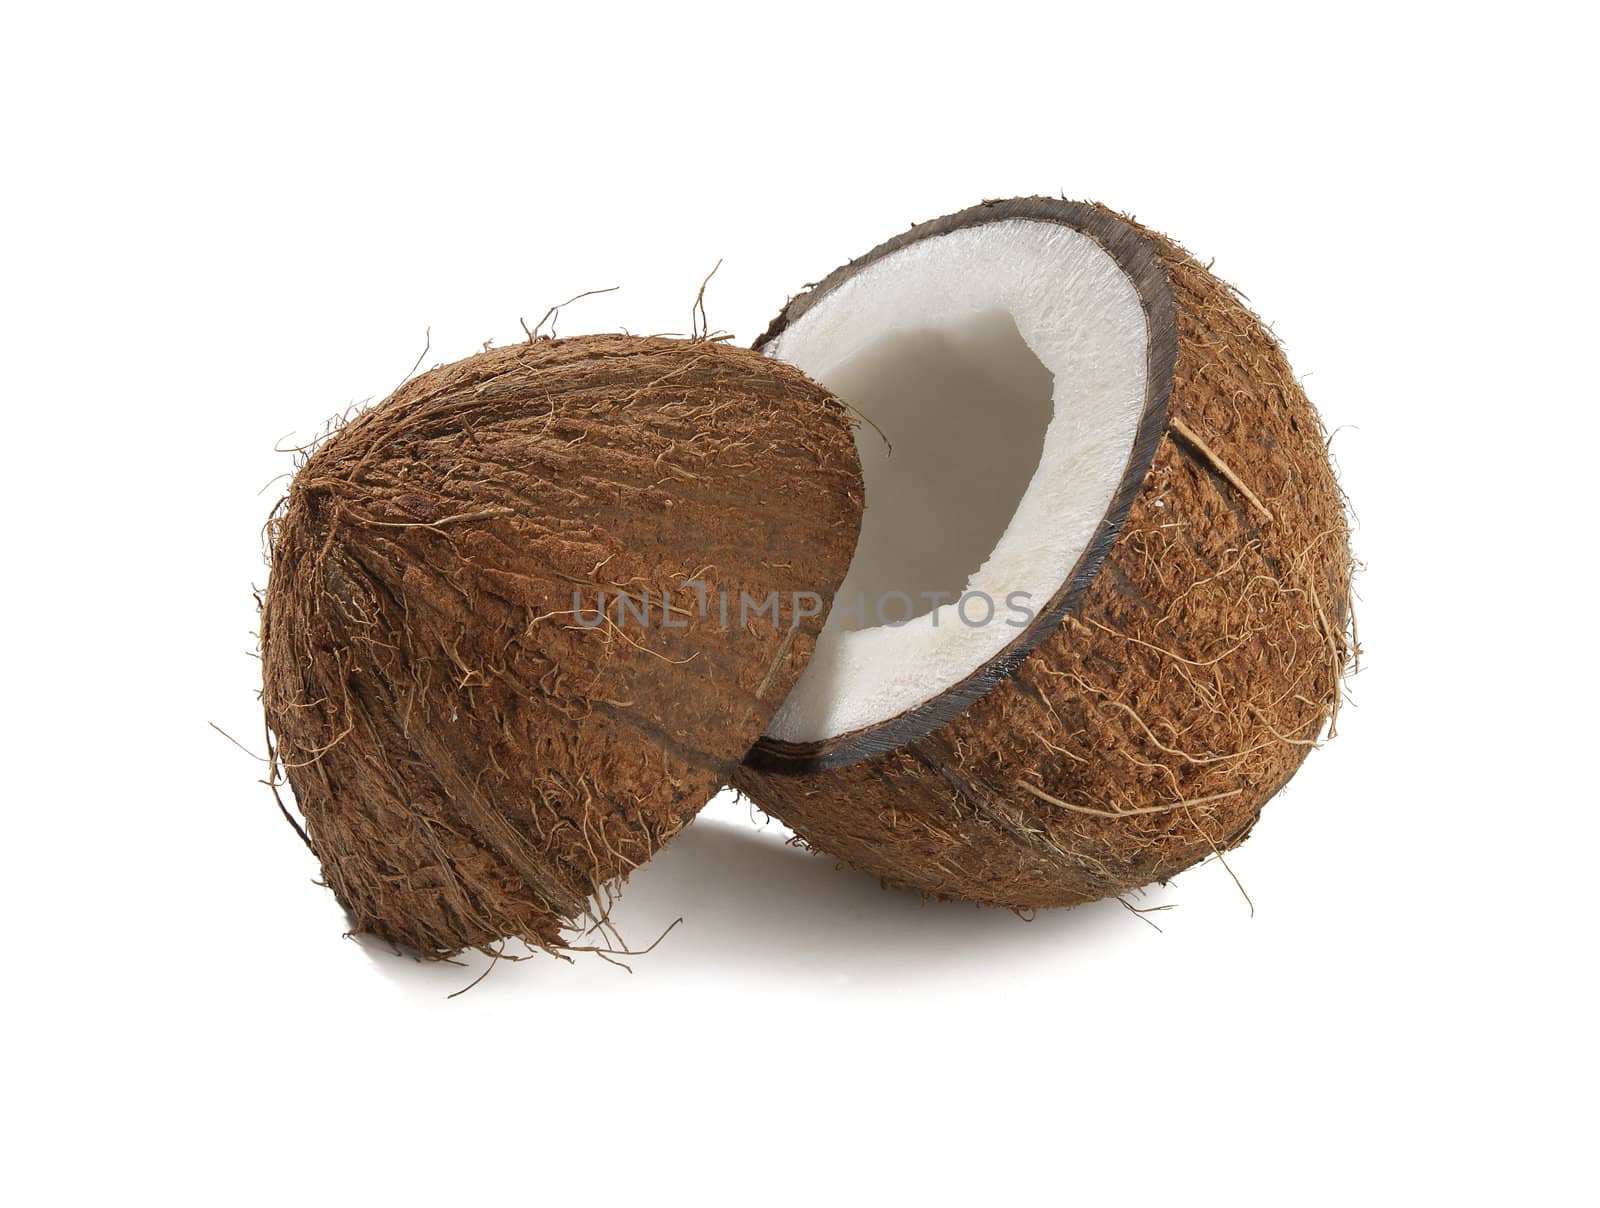 One opened coconut on the white bakground